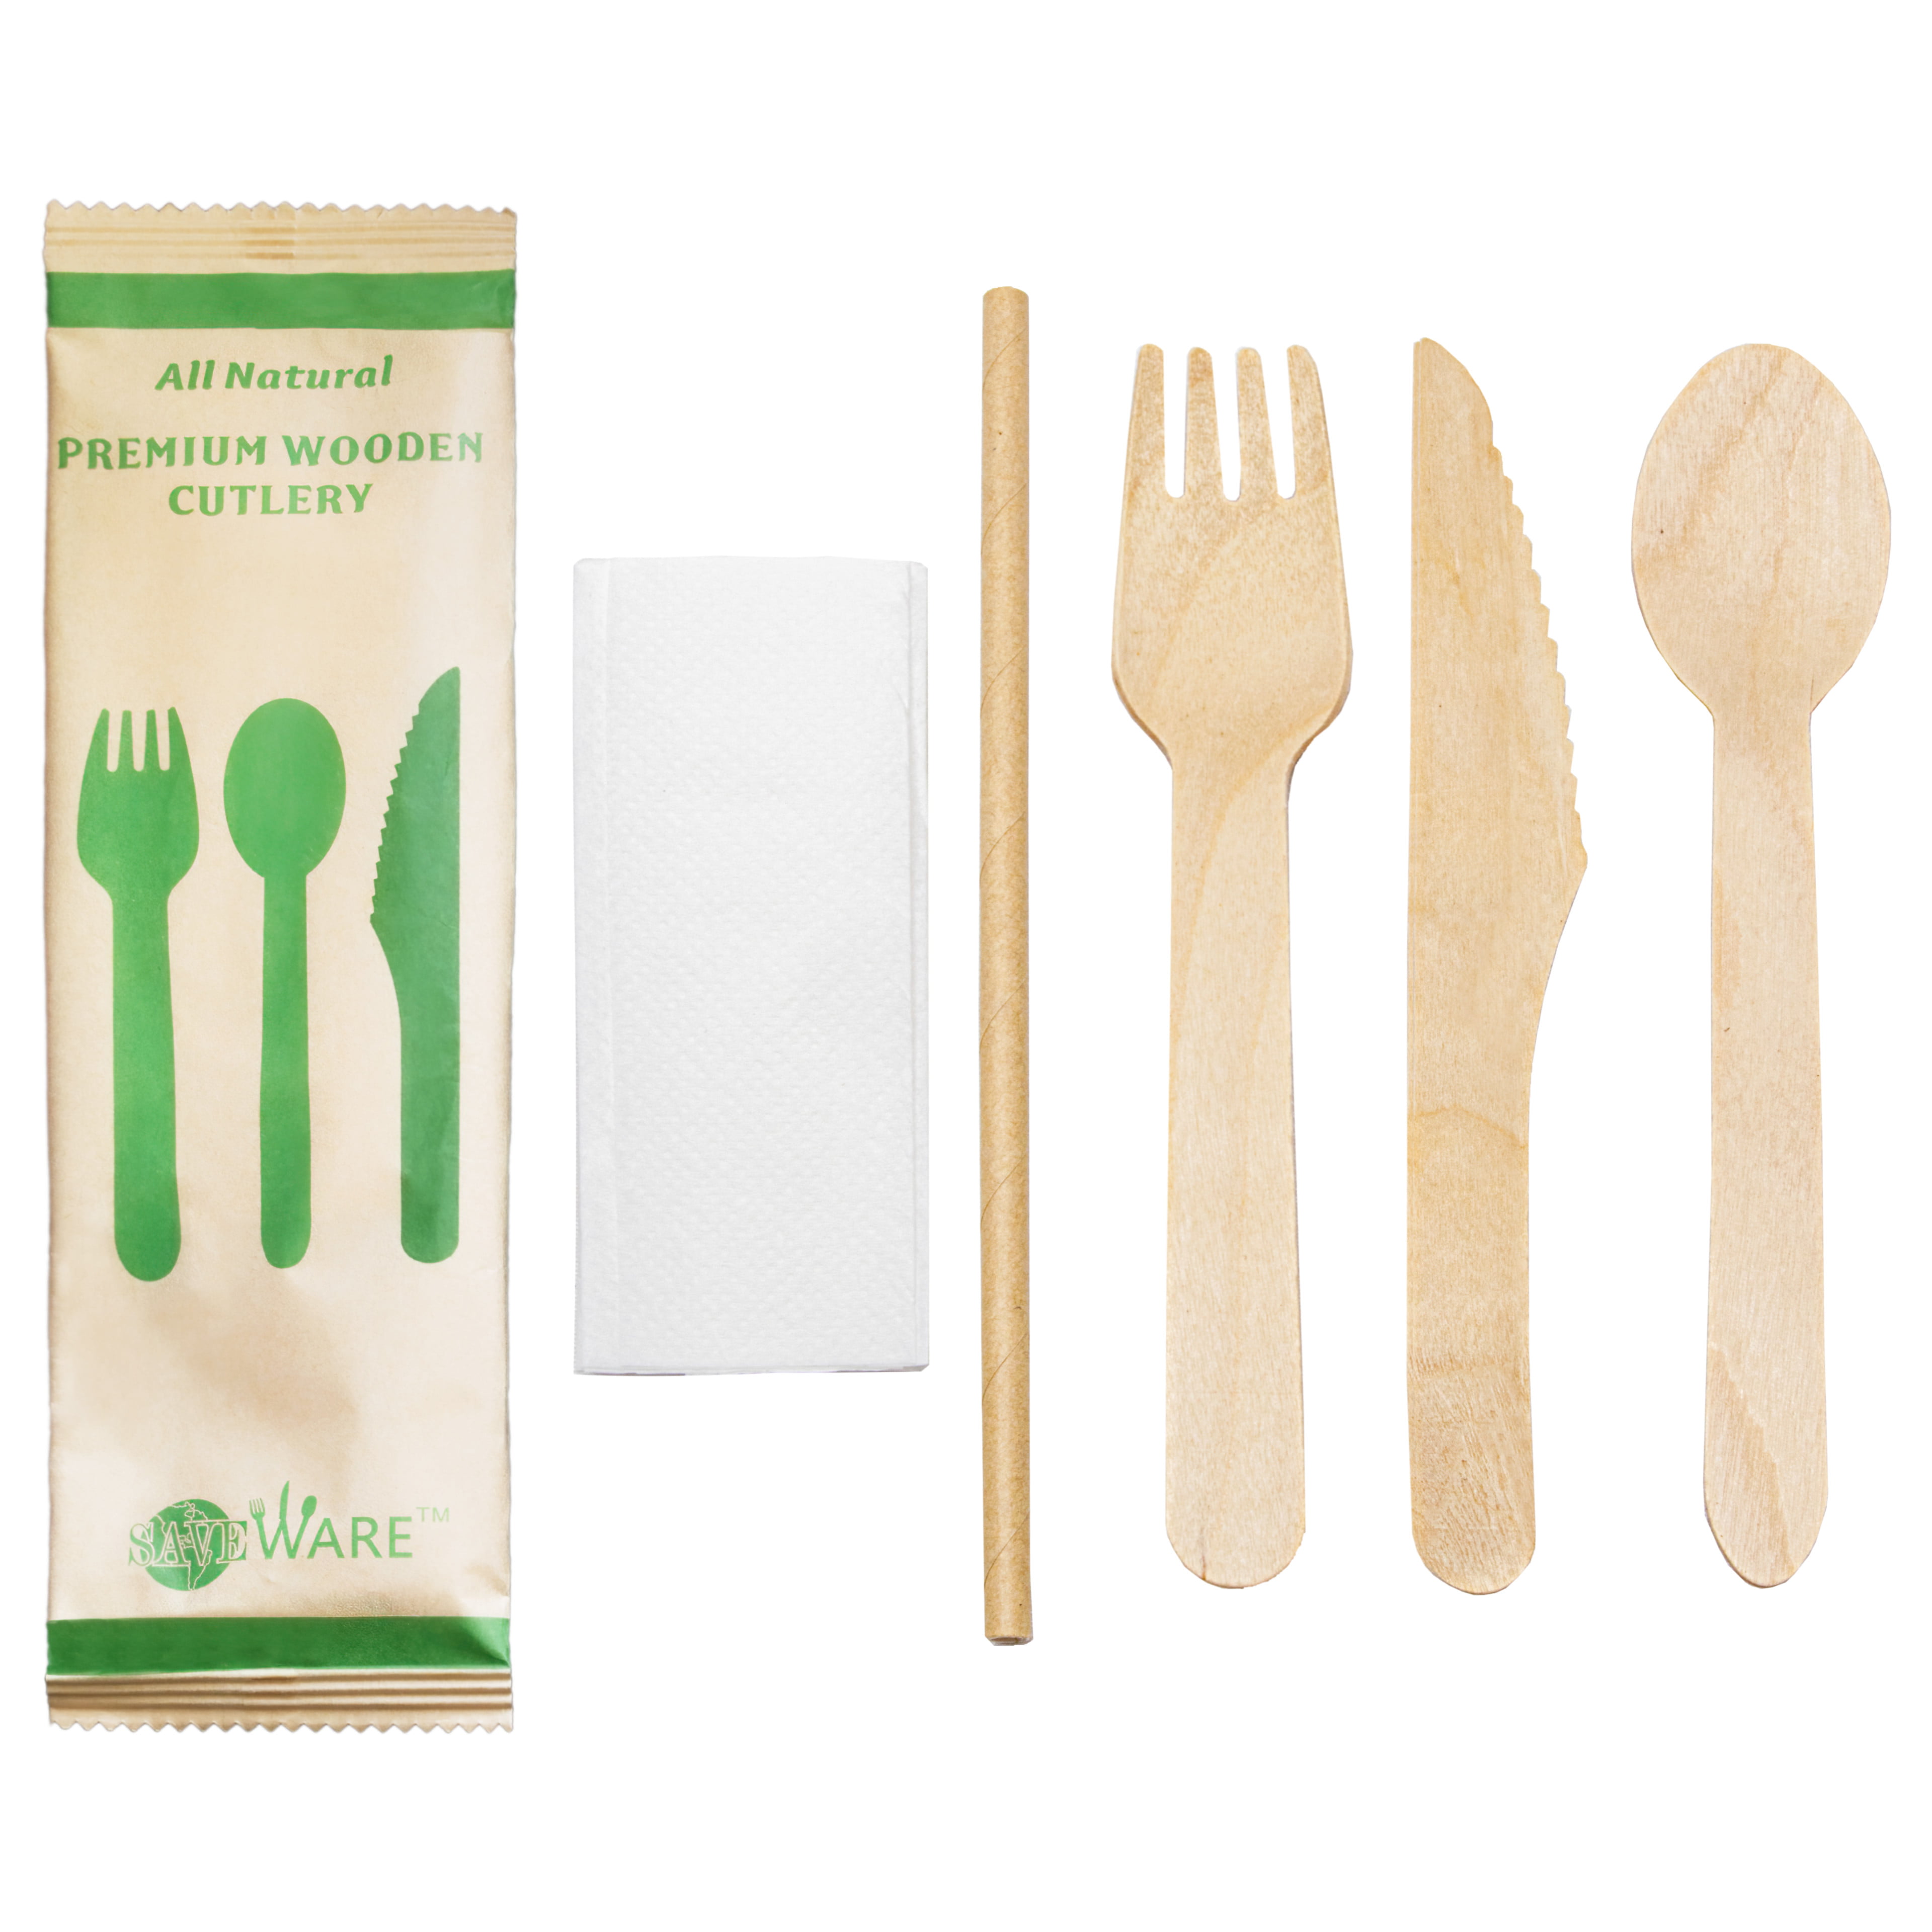 6 Length 25 Spoons Pack of 100 25 Knives Perfect Stix Green Cutlery 100ct Wooden Disposable Cutlery Kit of 50 Forks 